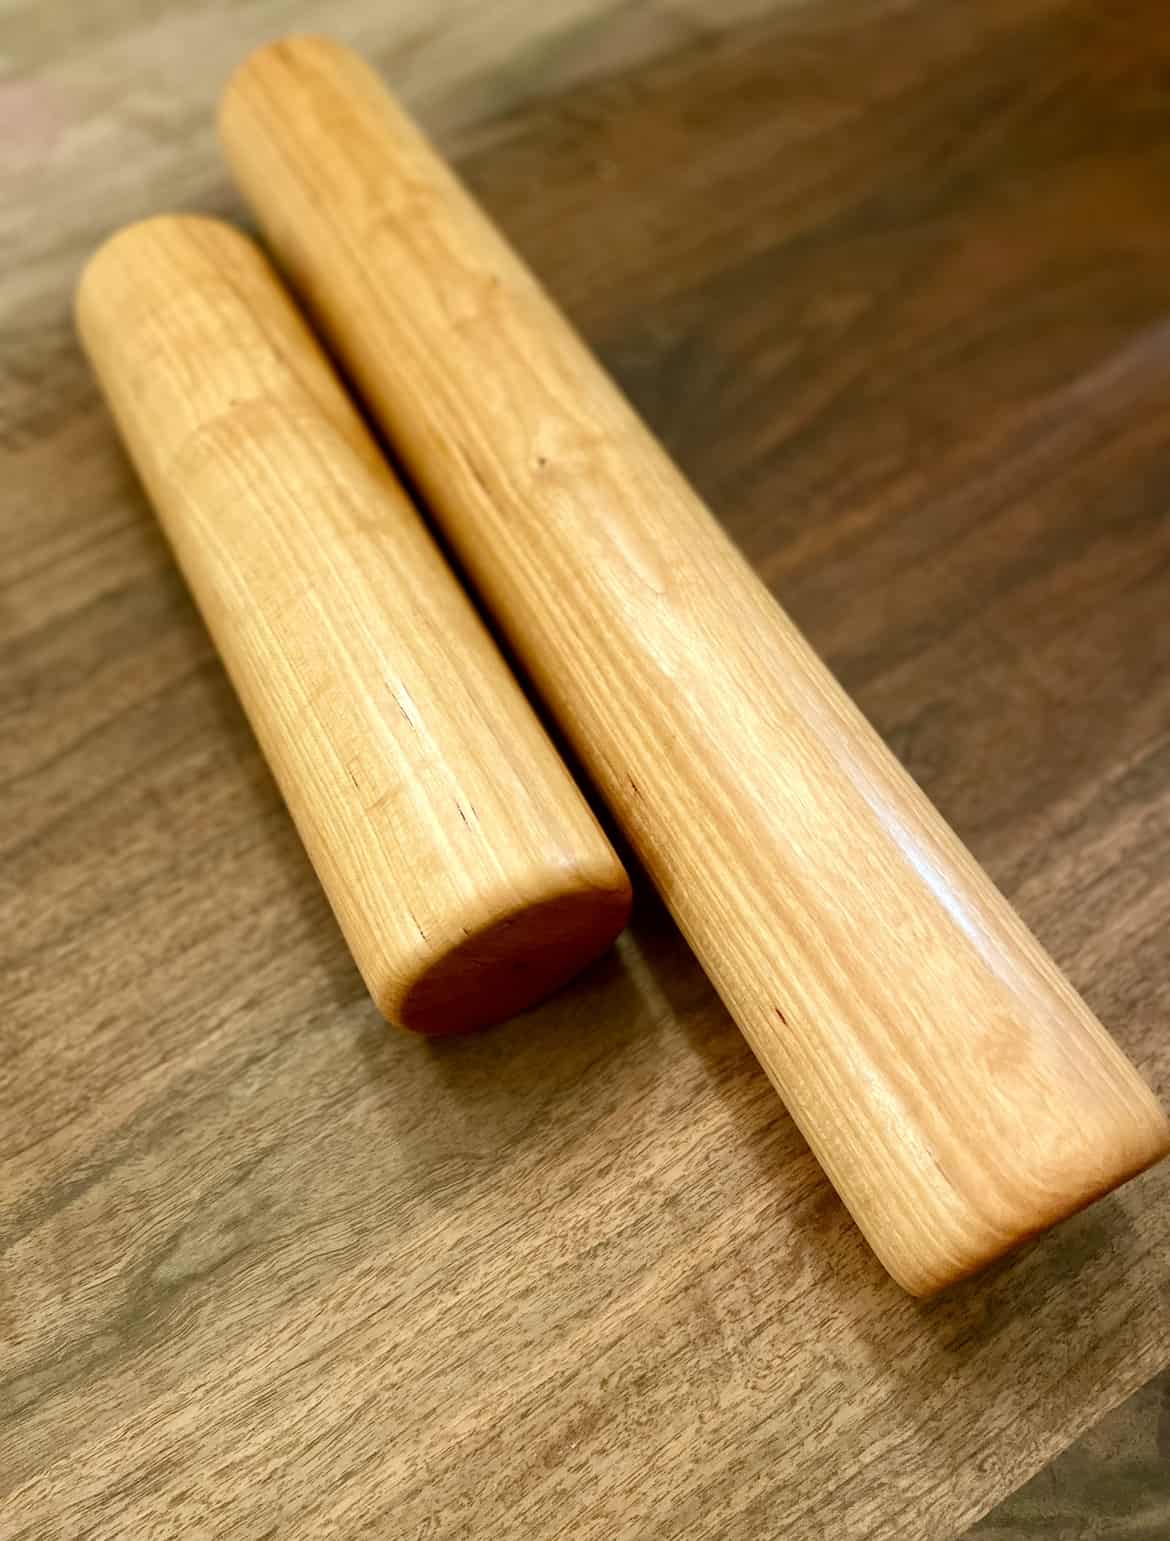 Handmade Oversized Rolling Pin in Oak, Maple, Walnut, and Cherry | Clines Crafted Woodworking, Georgetown, KY - Clines Crafted Woodworking LLC